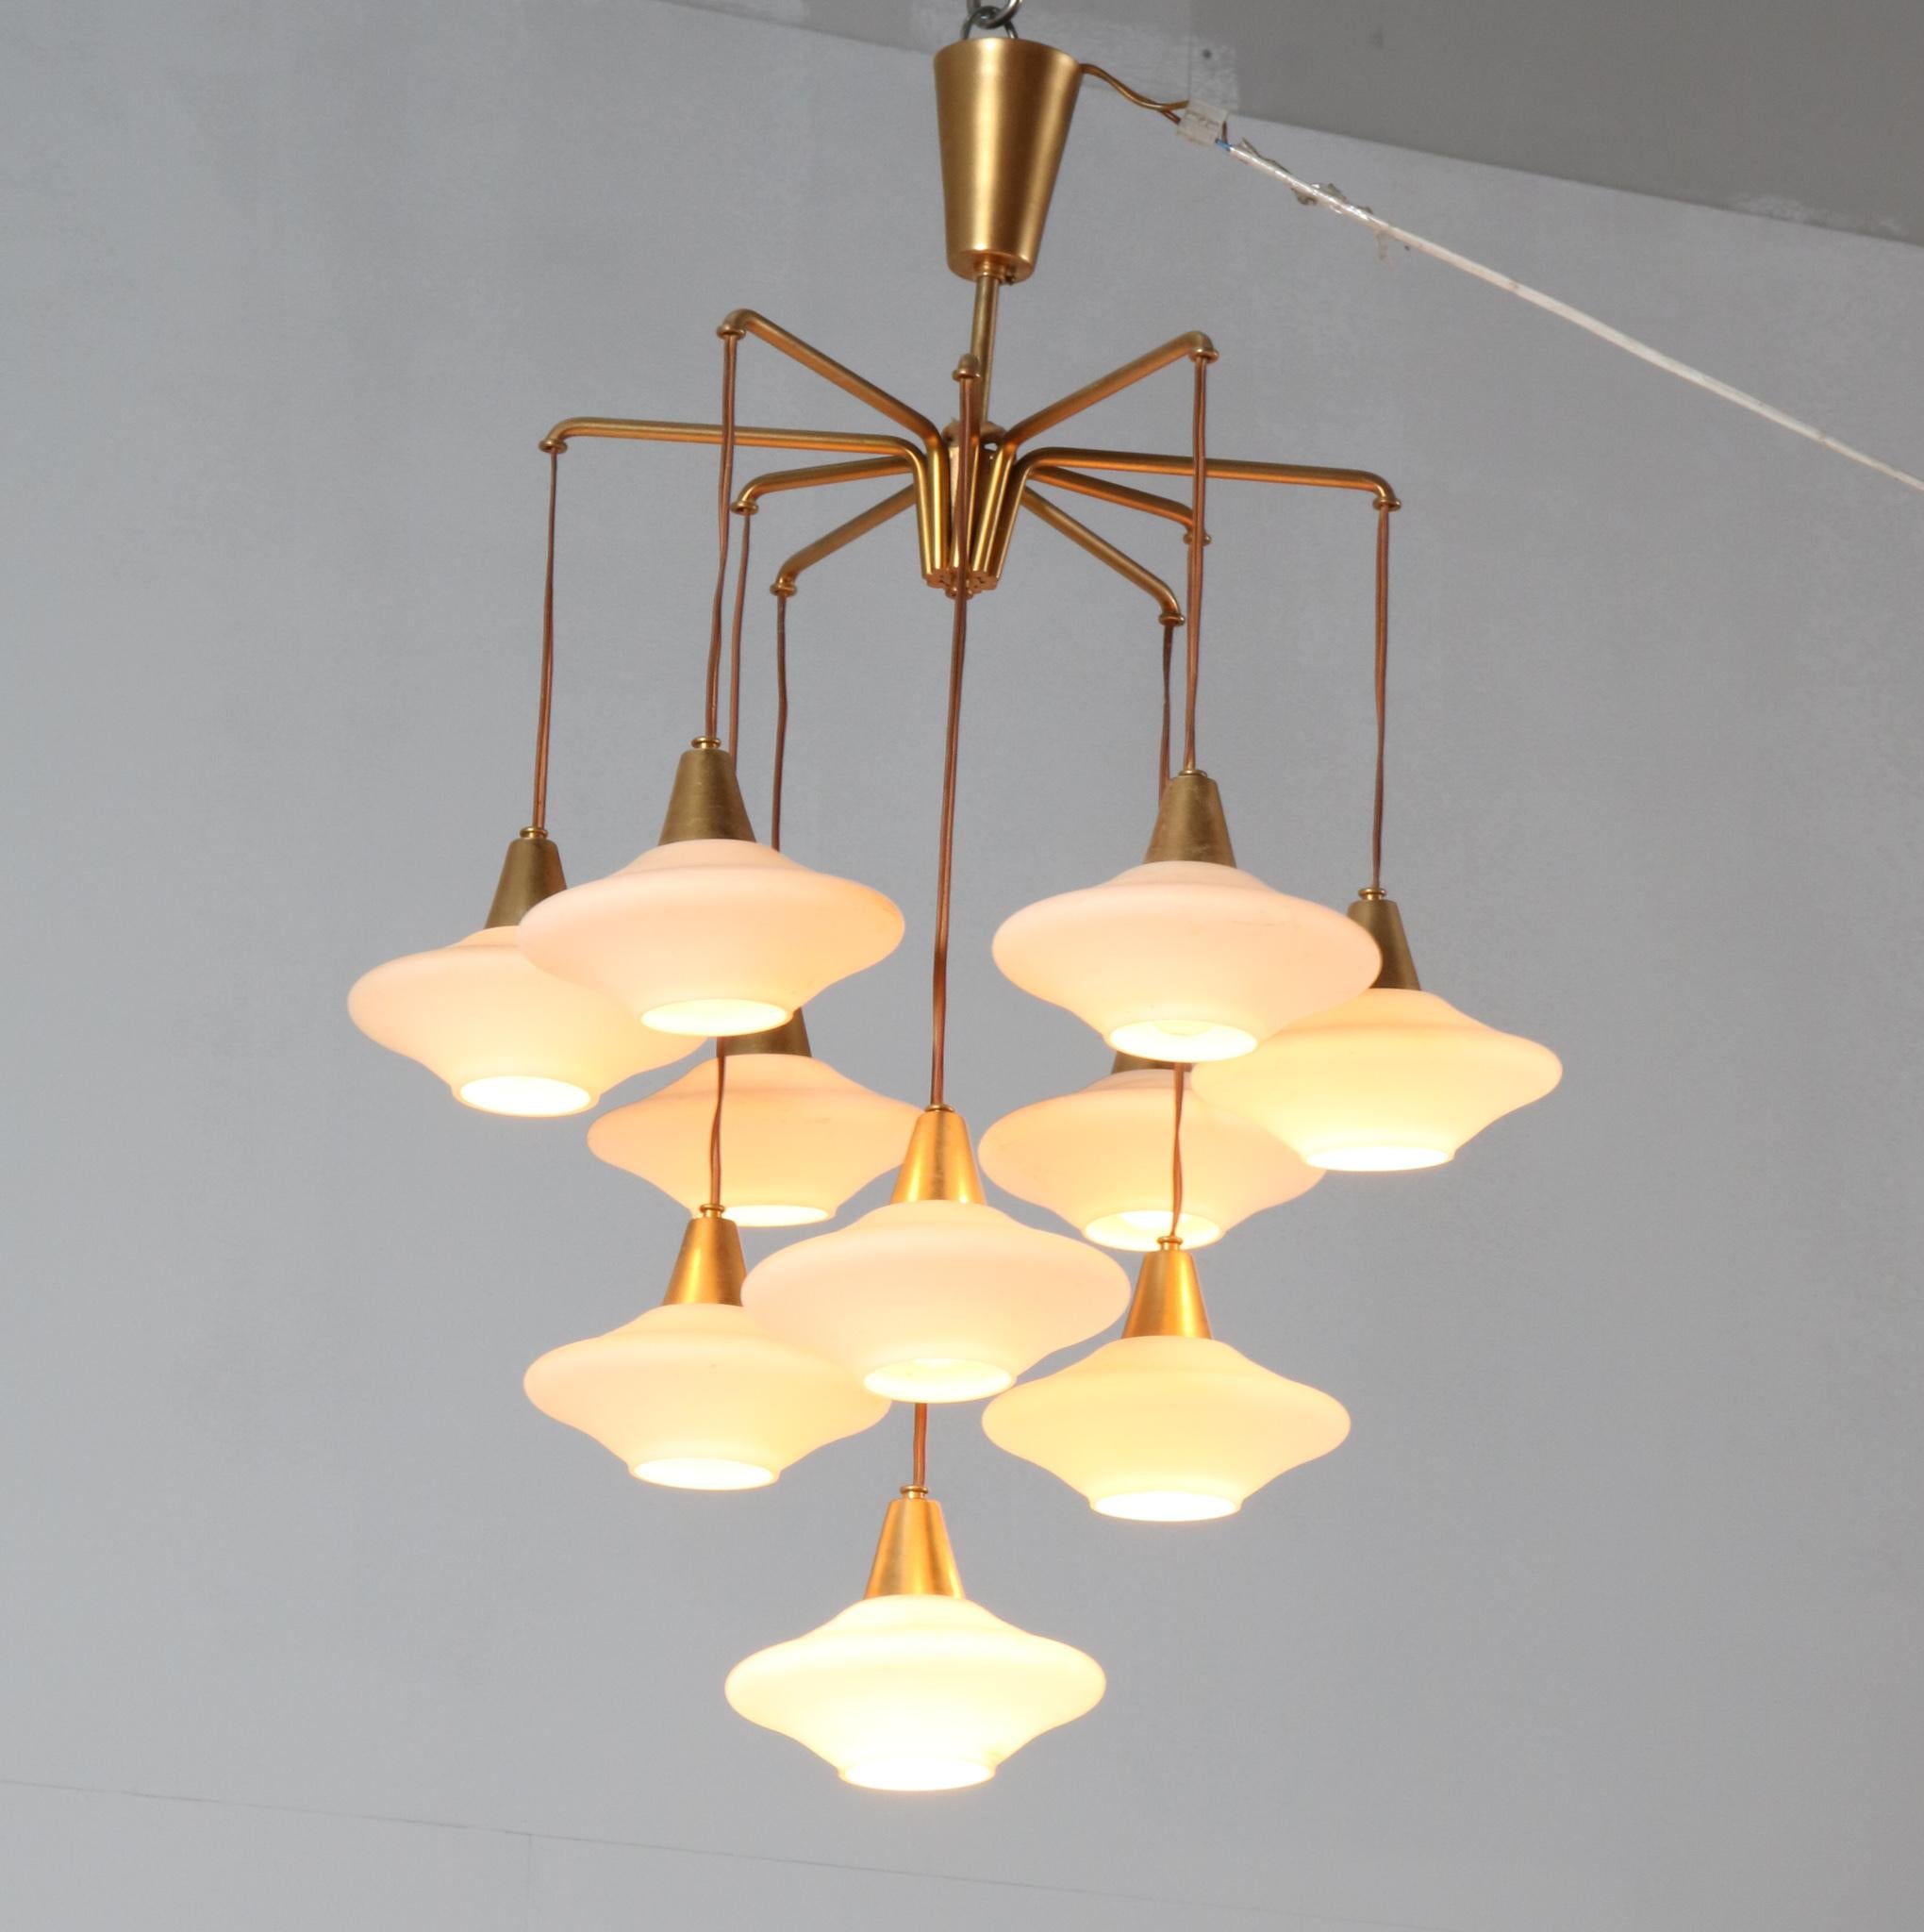 Mid-20th Century Mid-Century Modern Chandelier with Ten Milk Glass Shades, 1960s For Sale